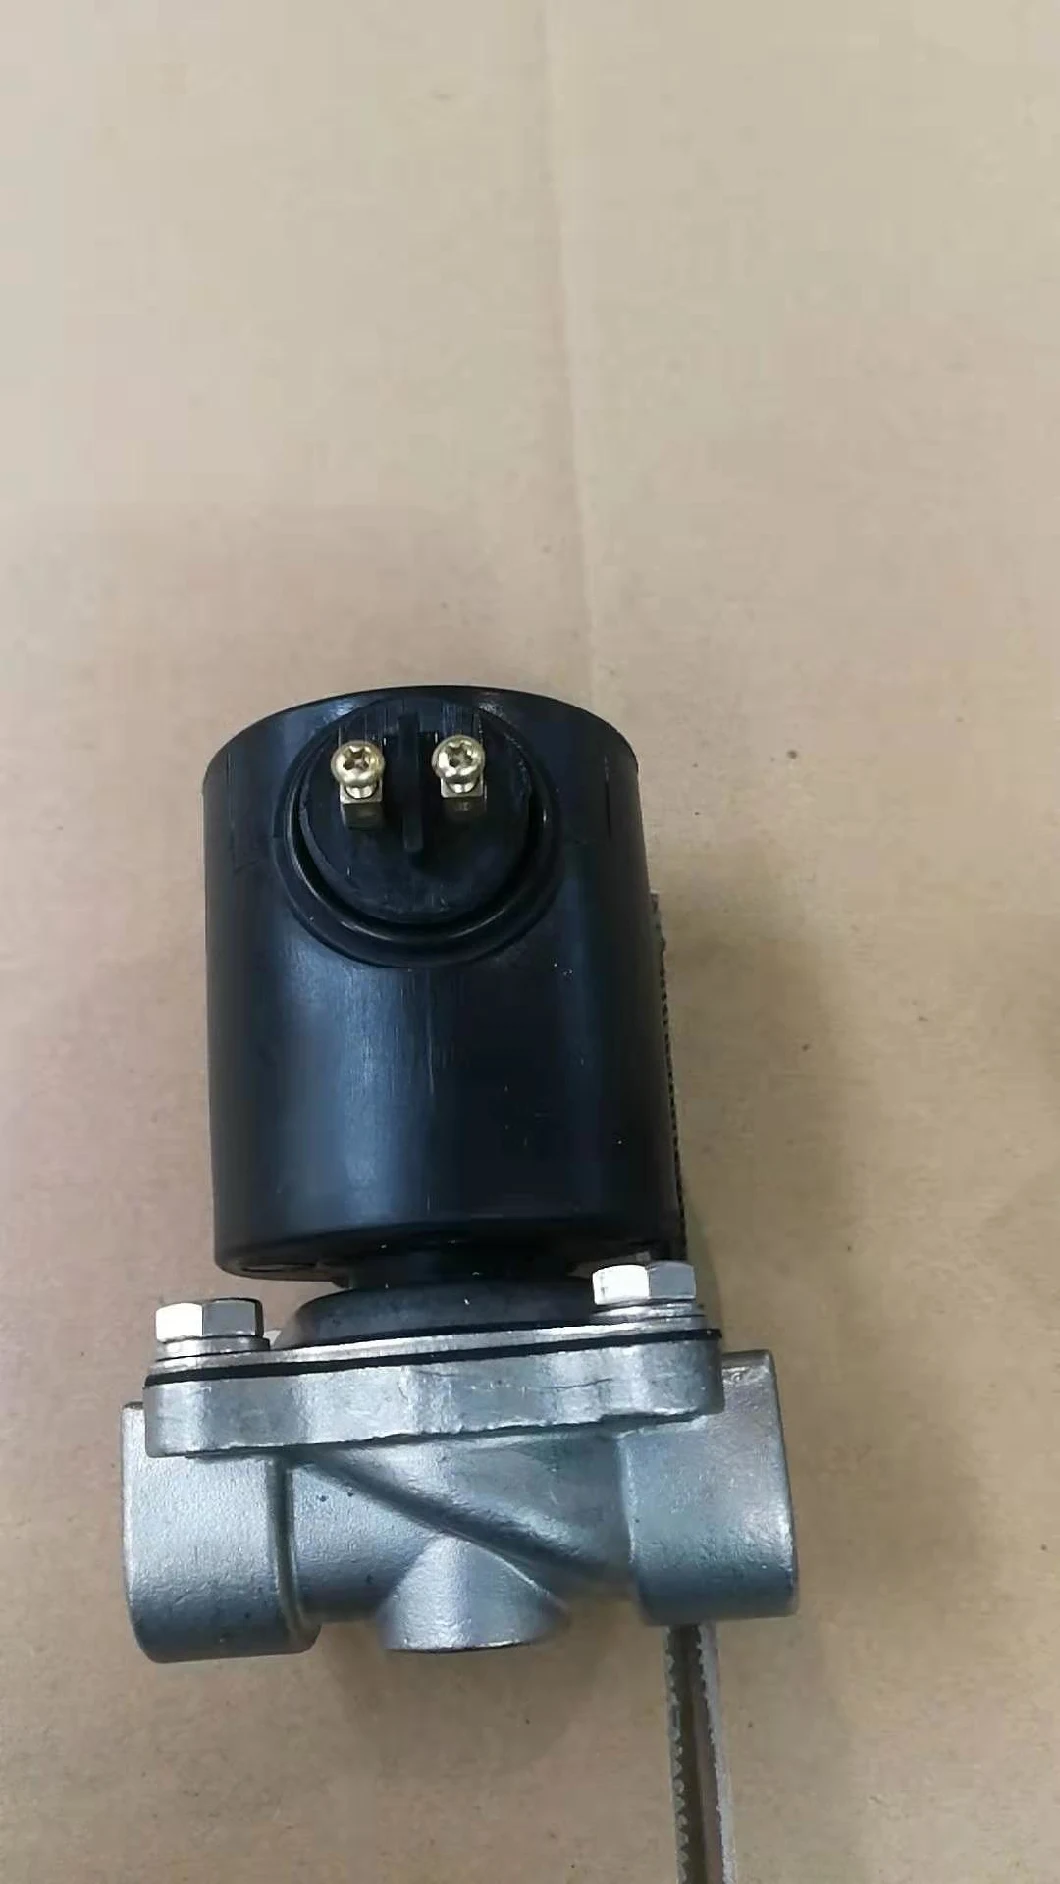 High Quality 24VDC Solenoid Valve Fountain 24VAC for Water Treatment Plant System